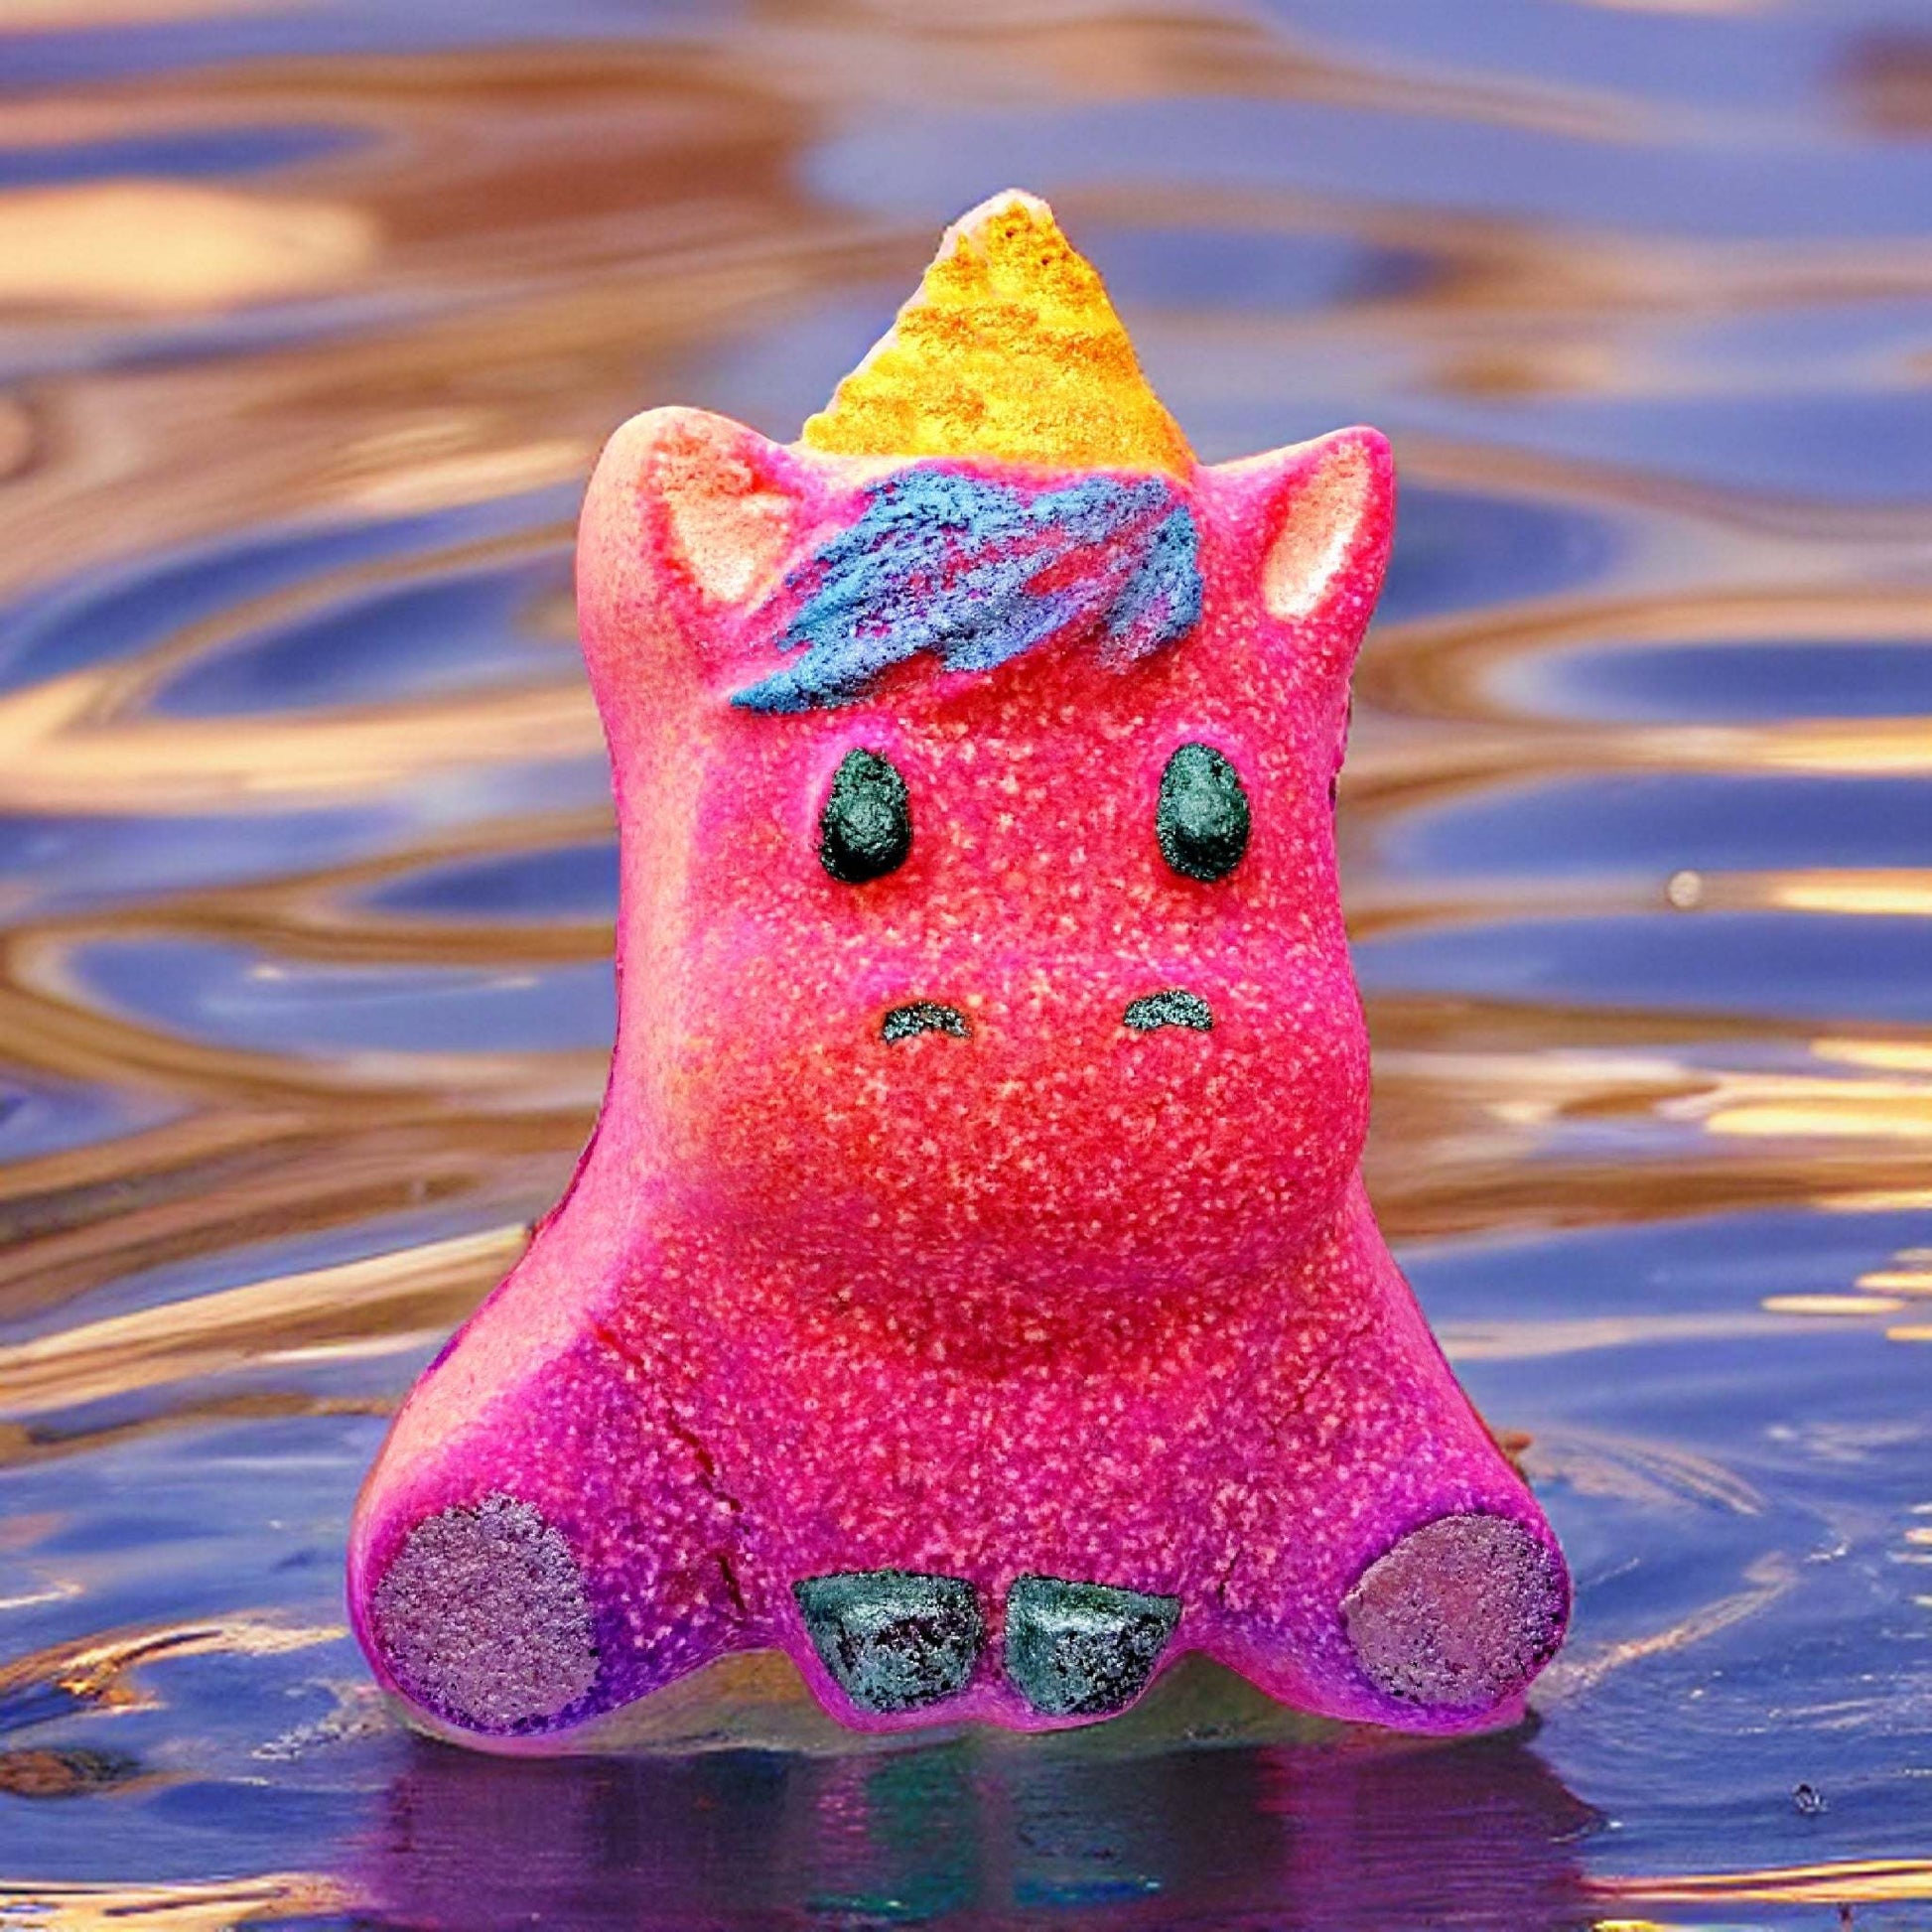 Unicorn magic in every sip! Try our Raspberry Lemonade Fizzy Unicorn Bomb today for an unforgettable experience.